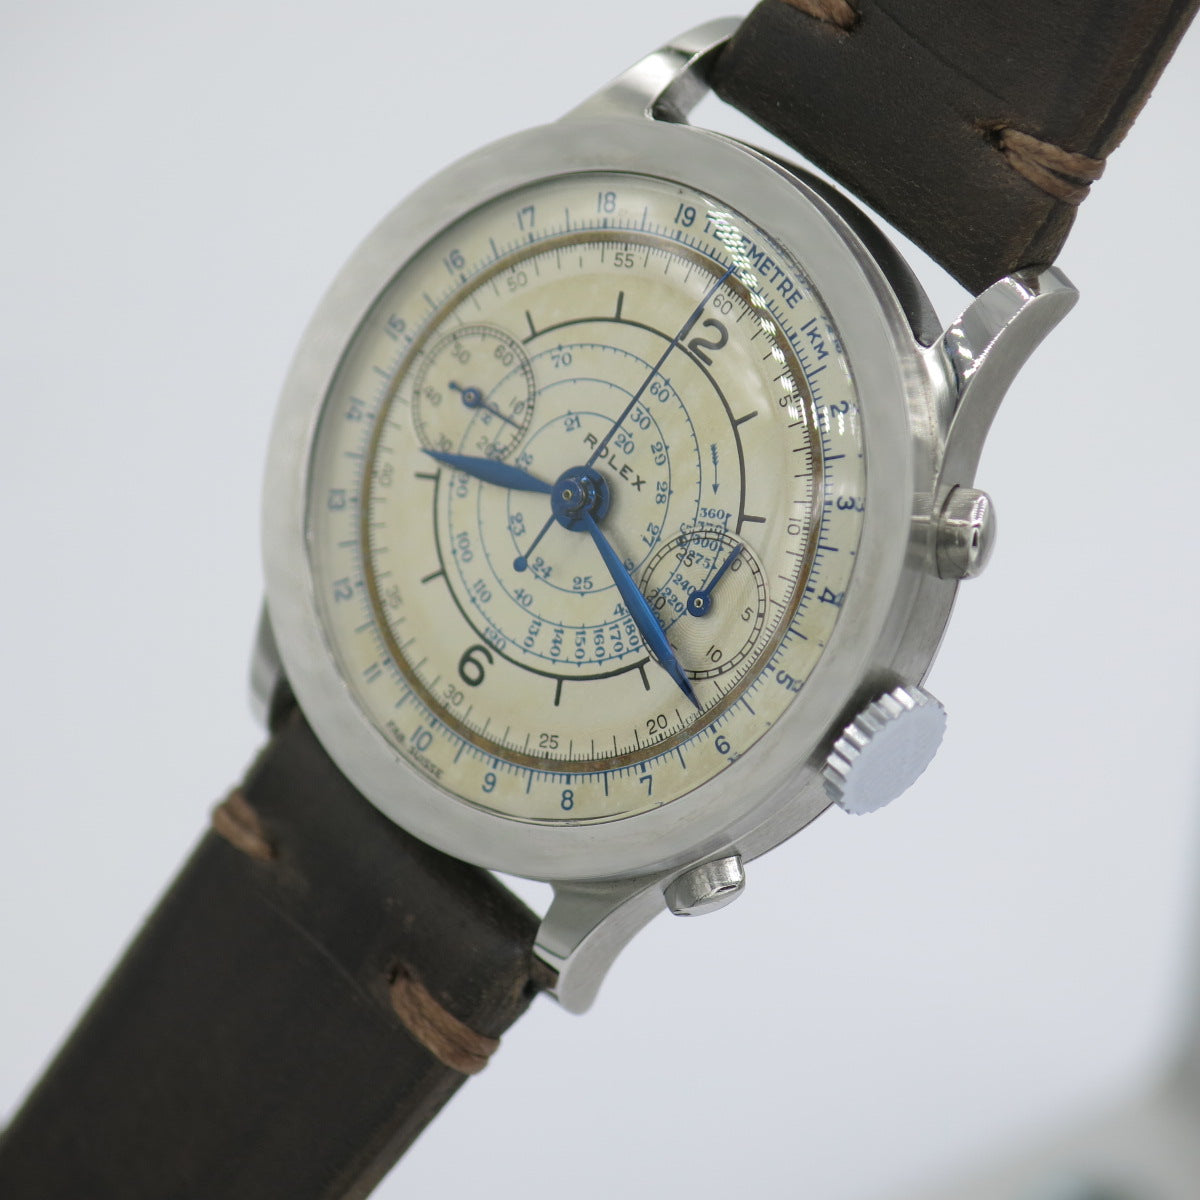 Wrist Chronicles - An extraordinary example of vintage Rolex chronograph